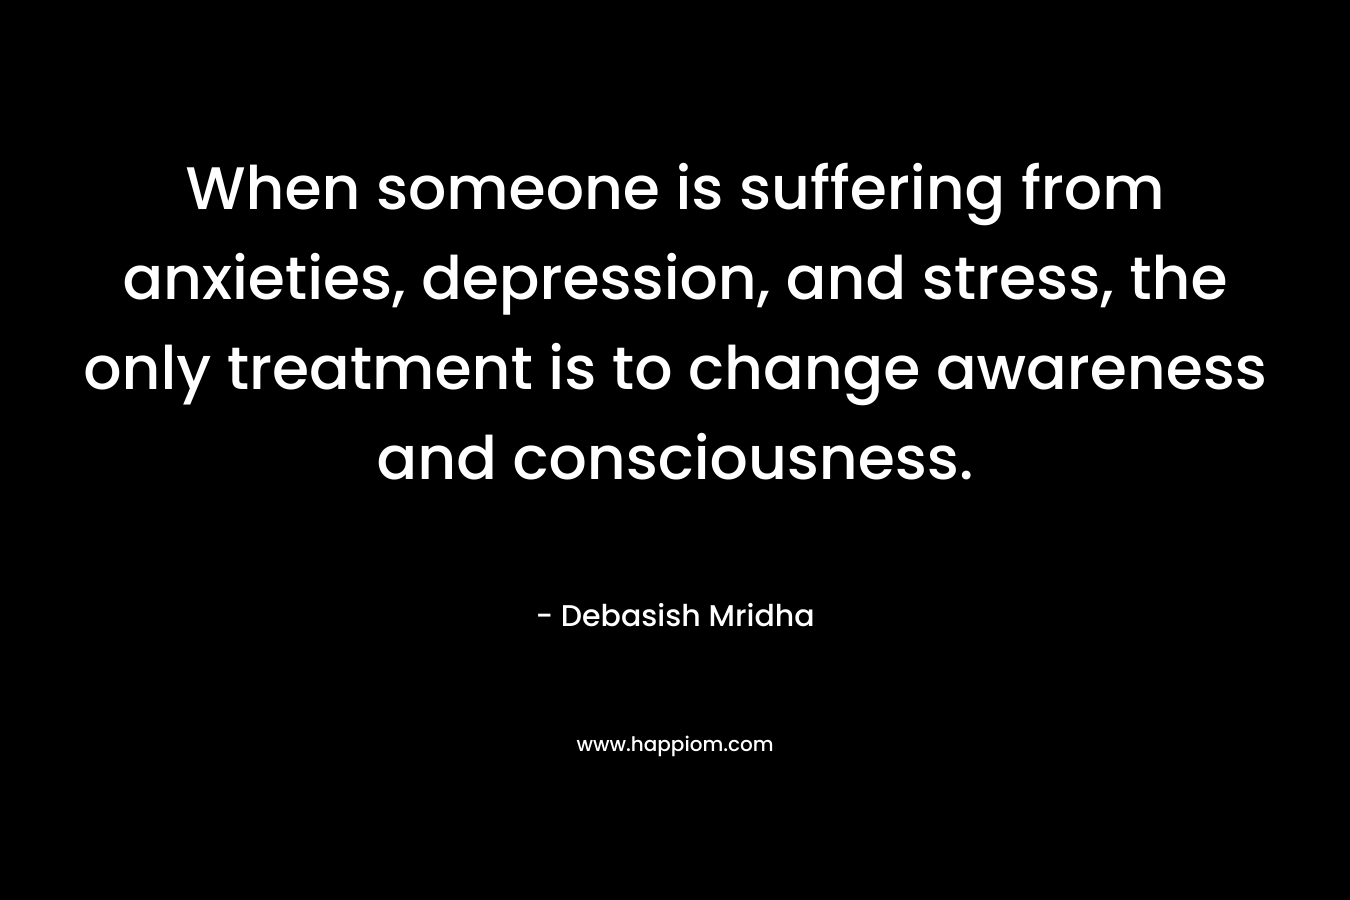 When someone is suffering from anxieties, depression, and stress, the only treatment is to change awareness and consciousness. – Debasish Mridha